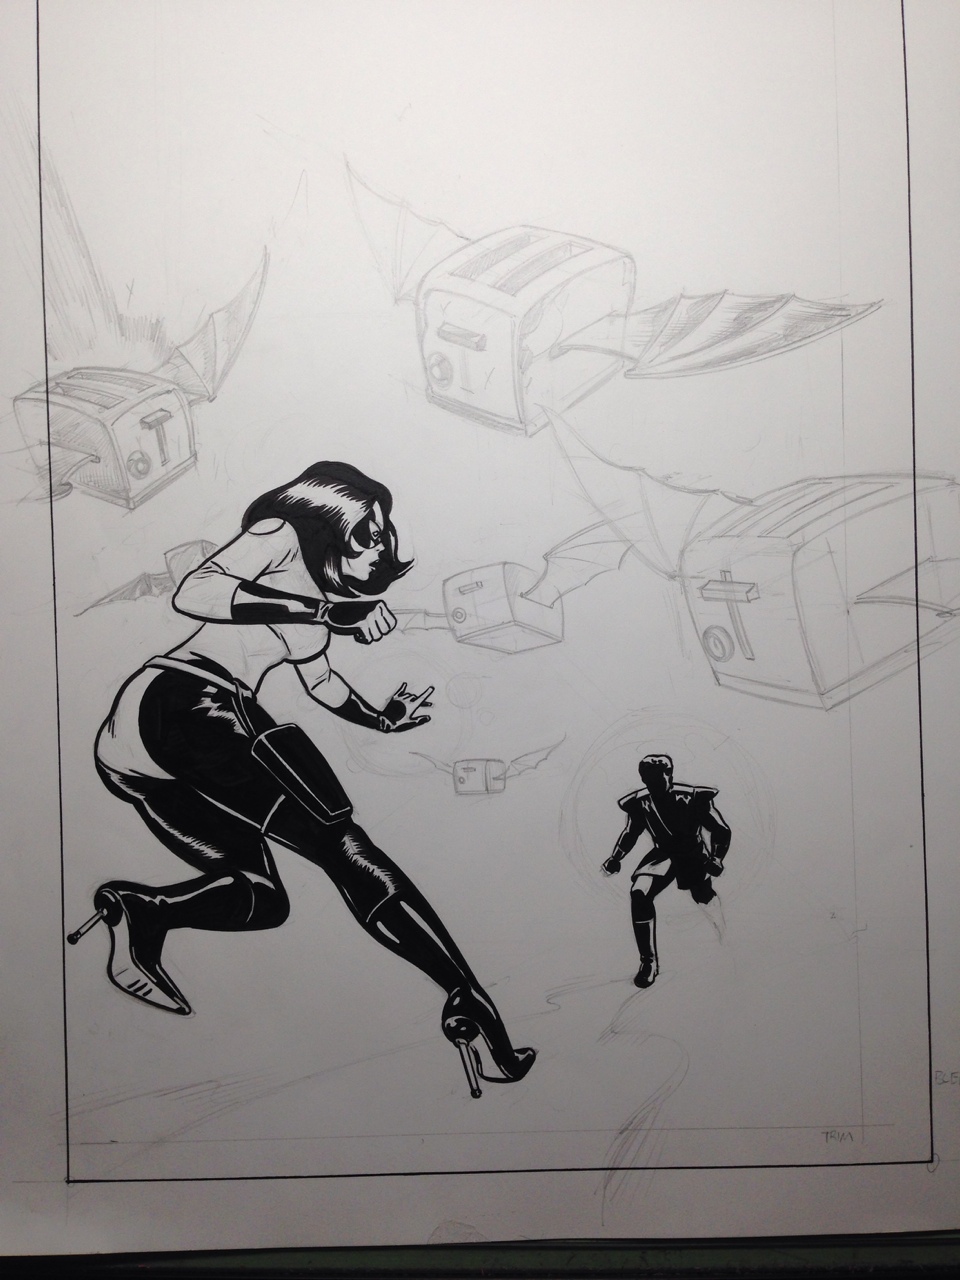 partially-inked stage of this cover